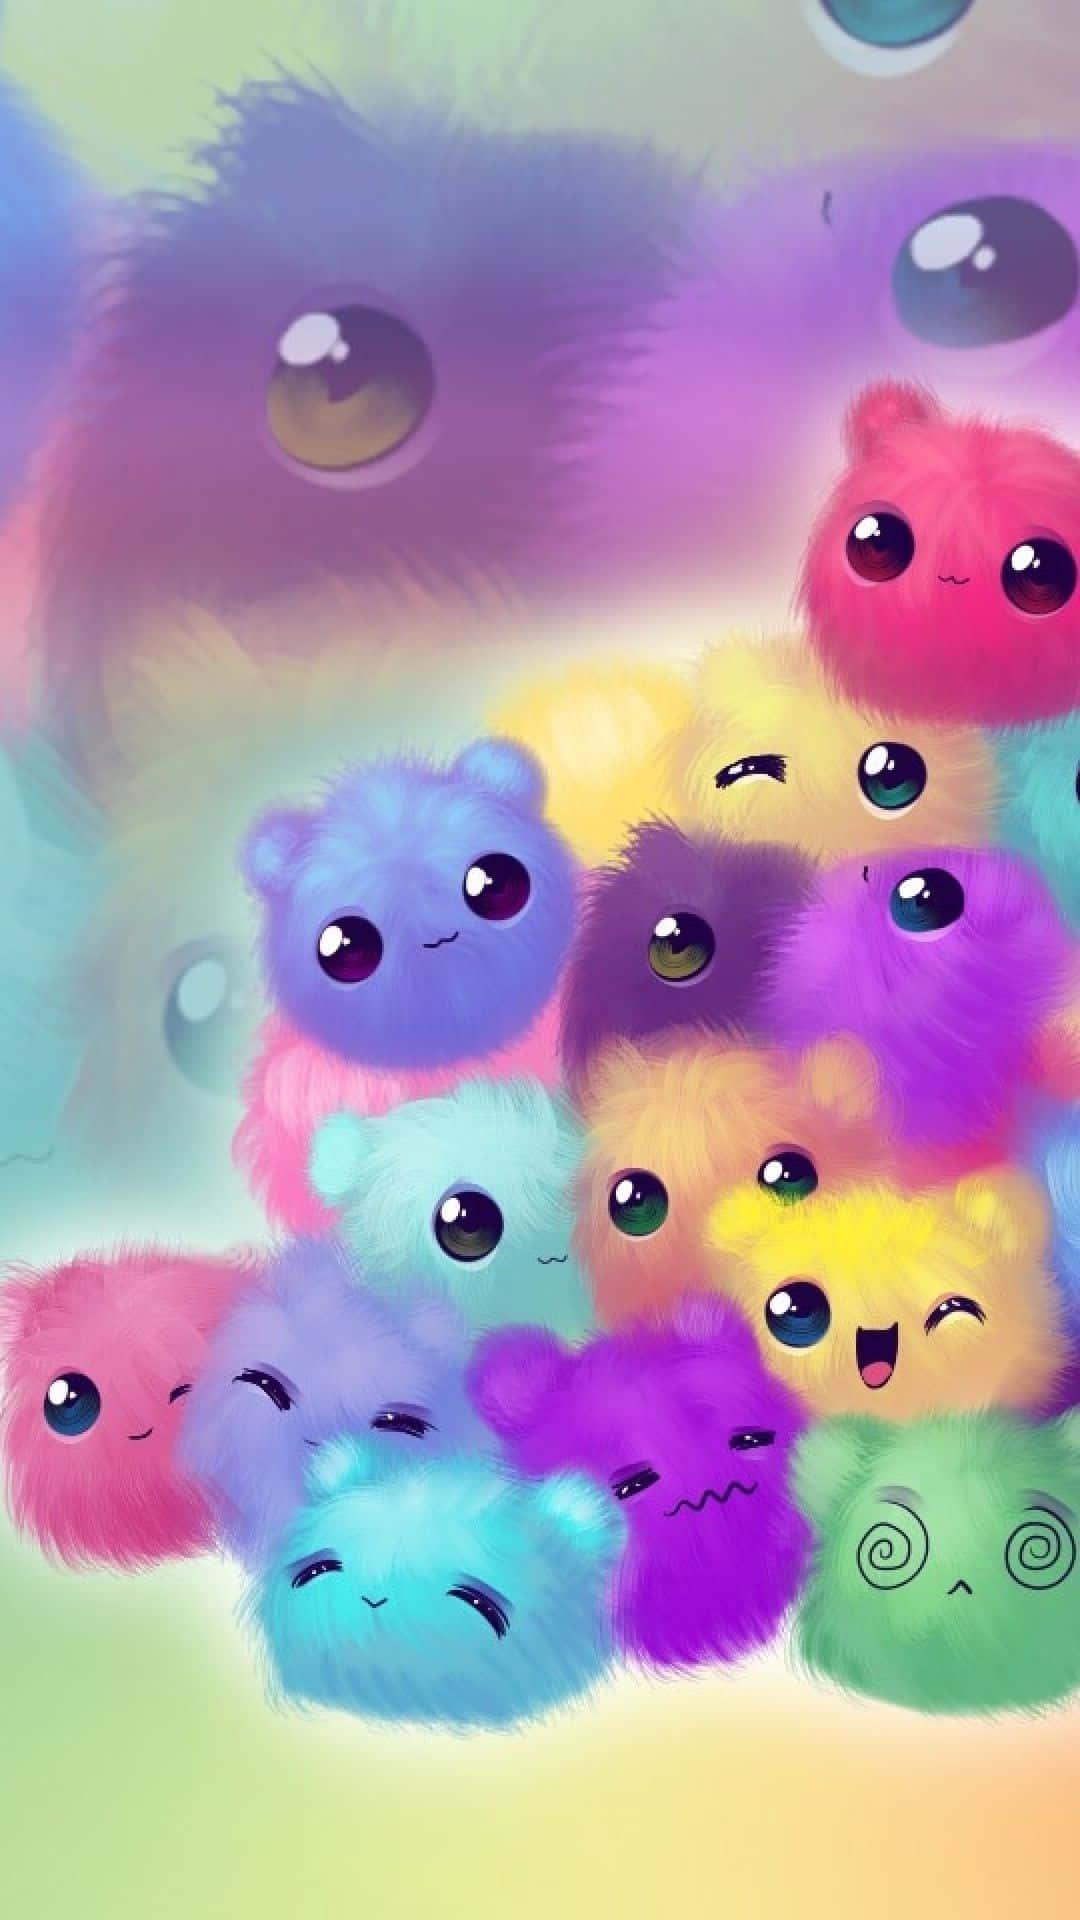 This Cute Kawaii Face Will Brighten Up Any Day Wallpaper